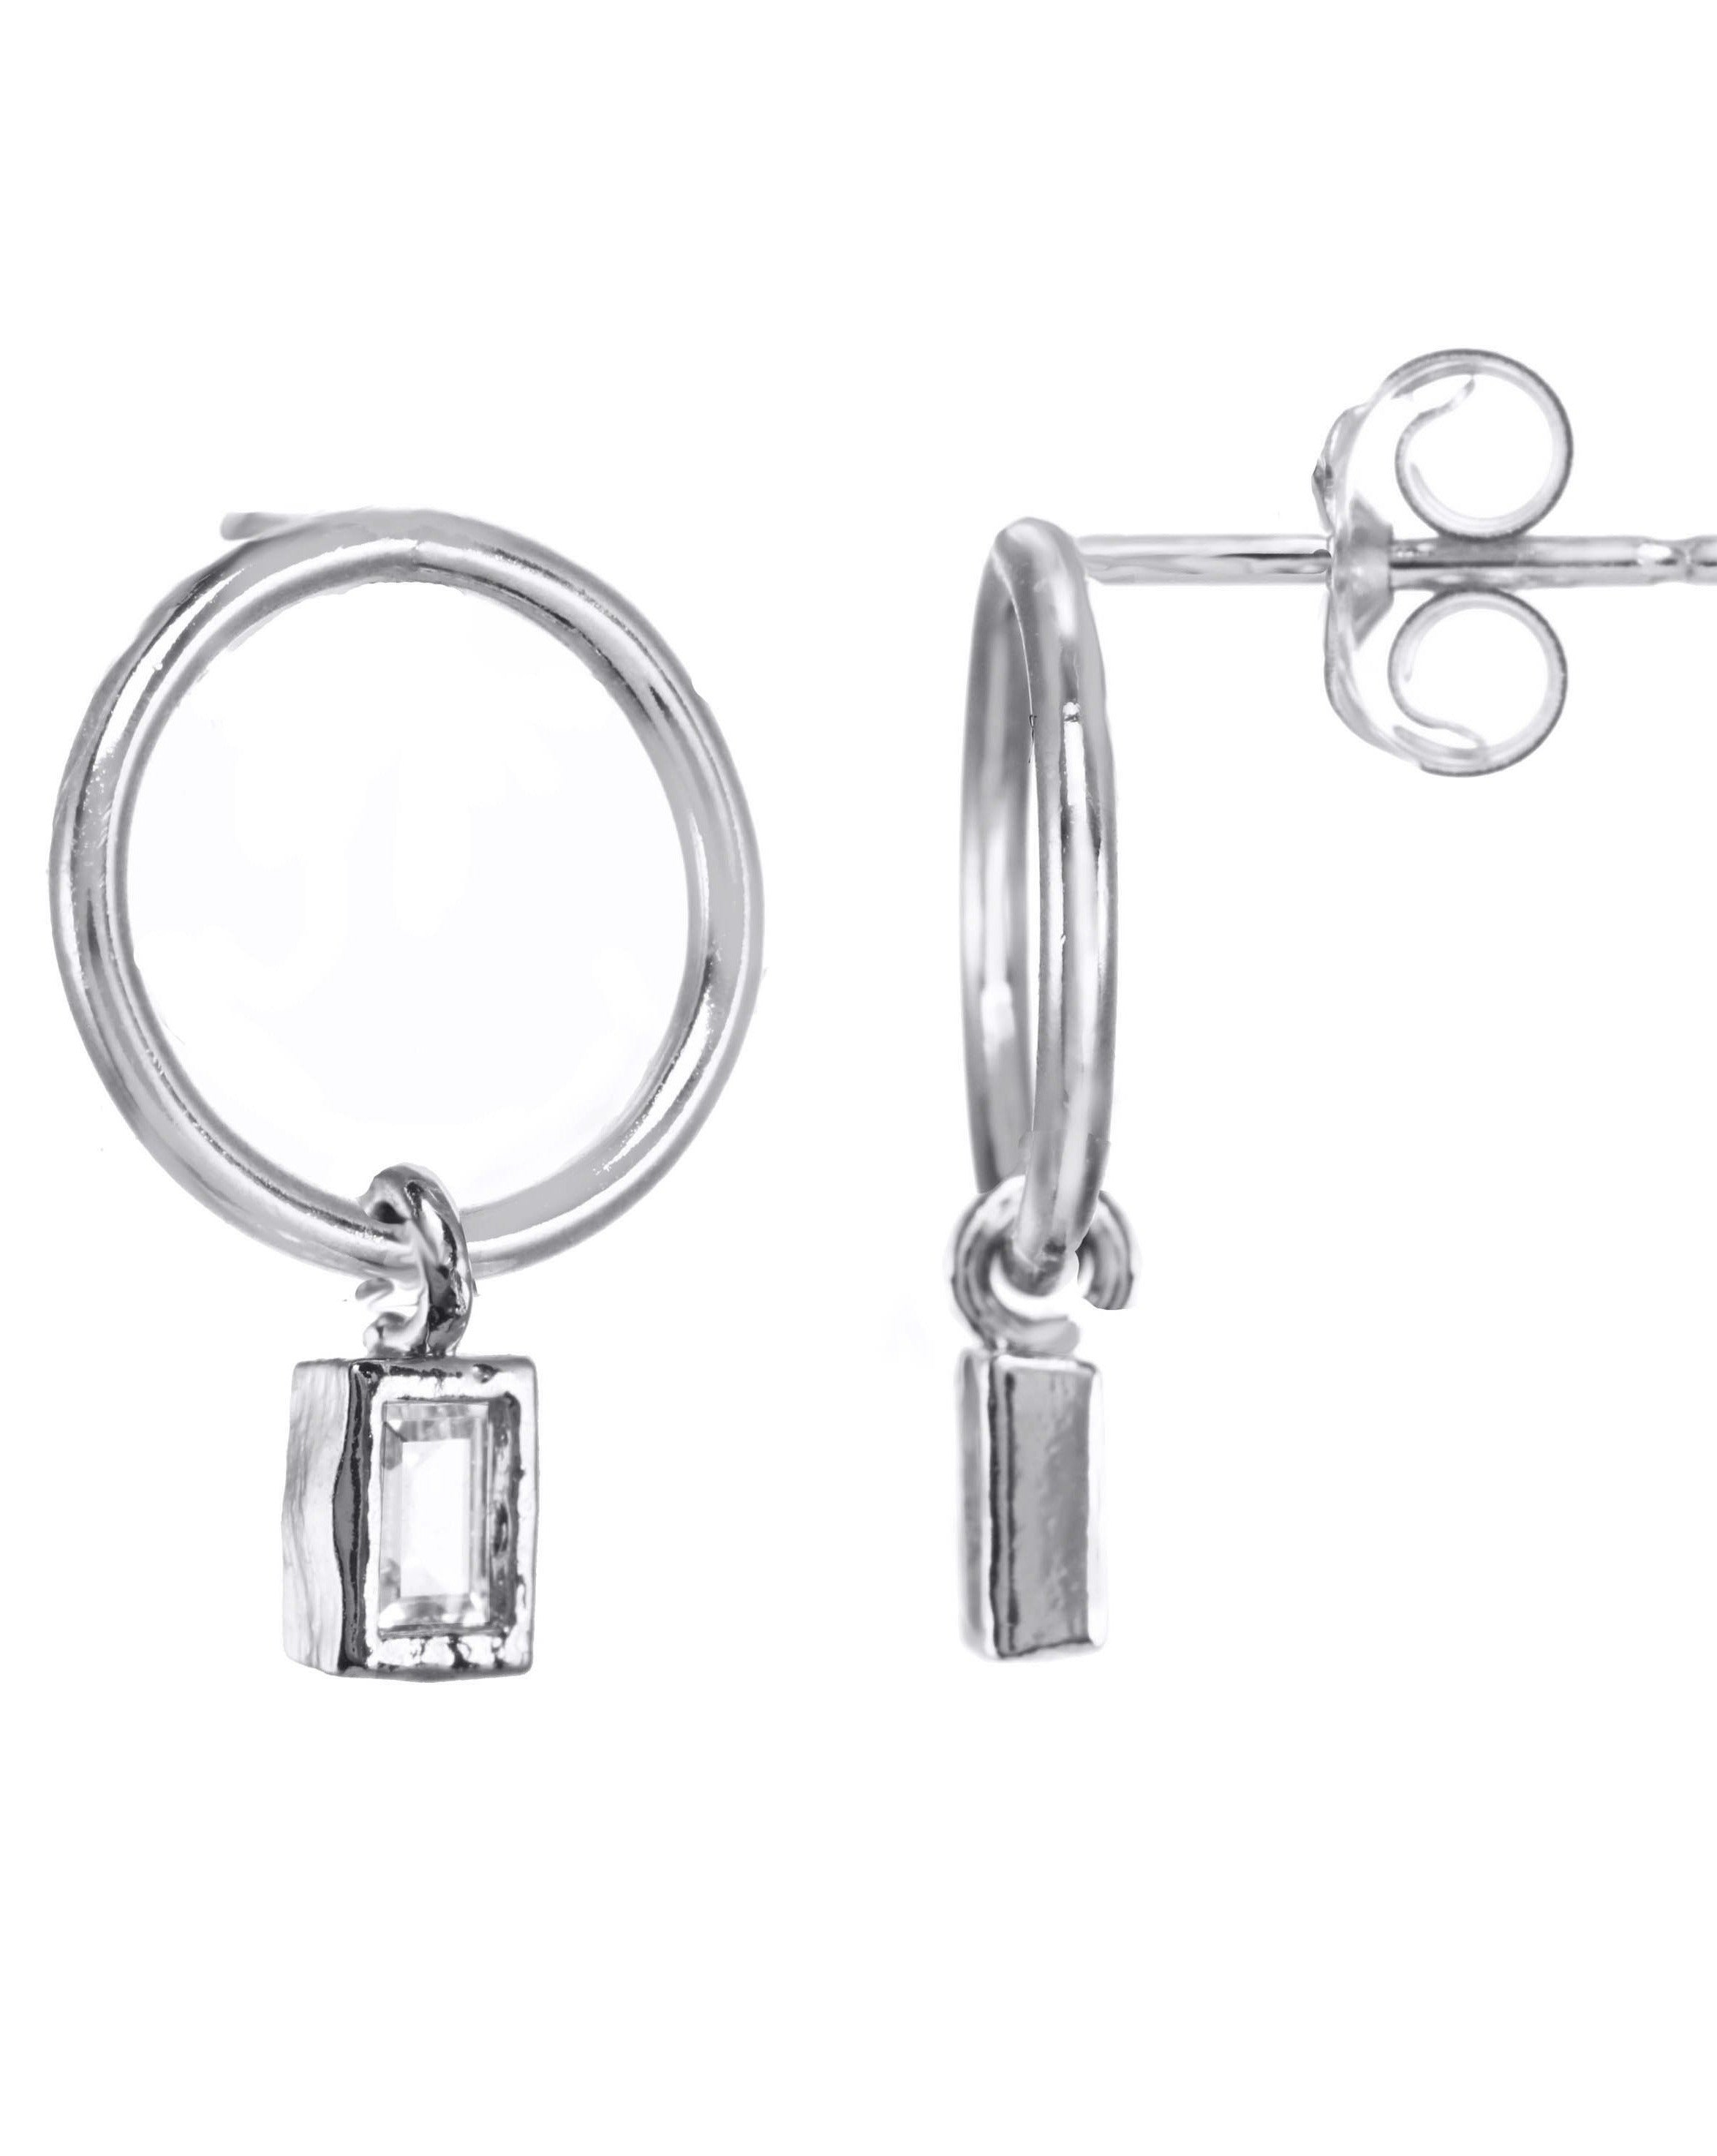 Hannah Earrings by KOZAKH. Mini hoop stud earrings with dangly square cut Cubic Zirconia, crafted in Sterling Silver. 